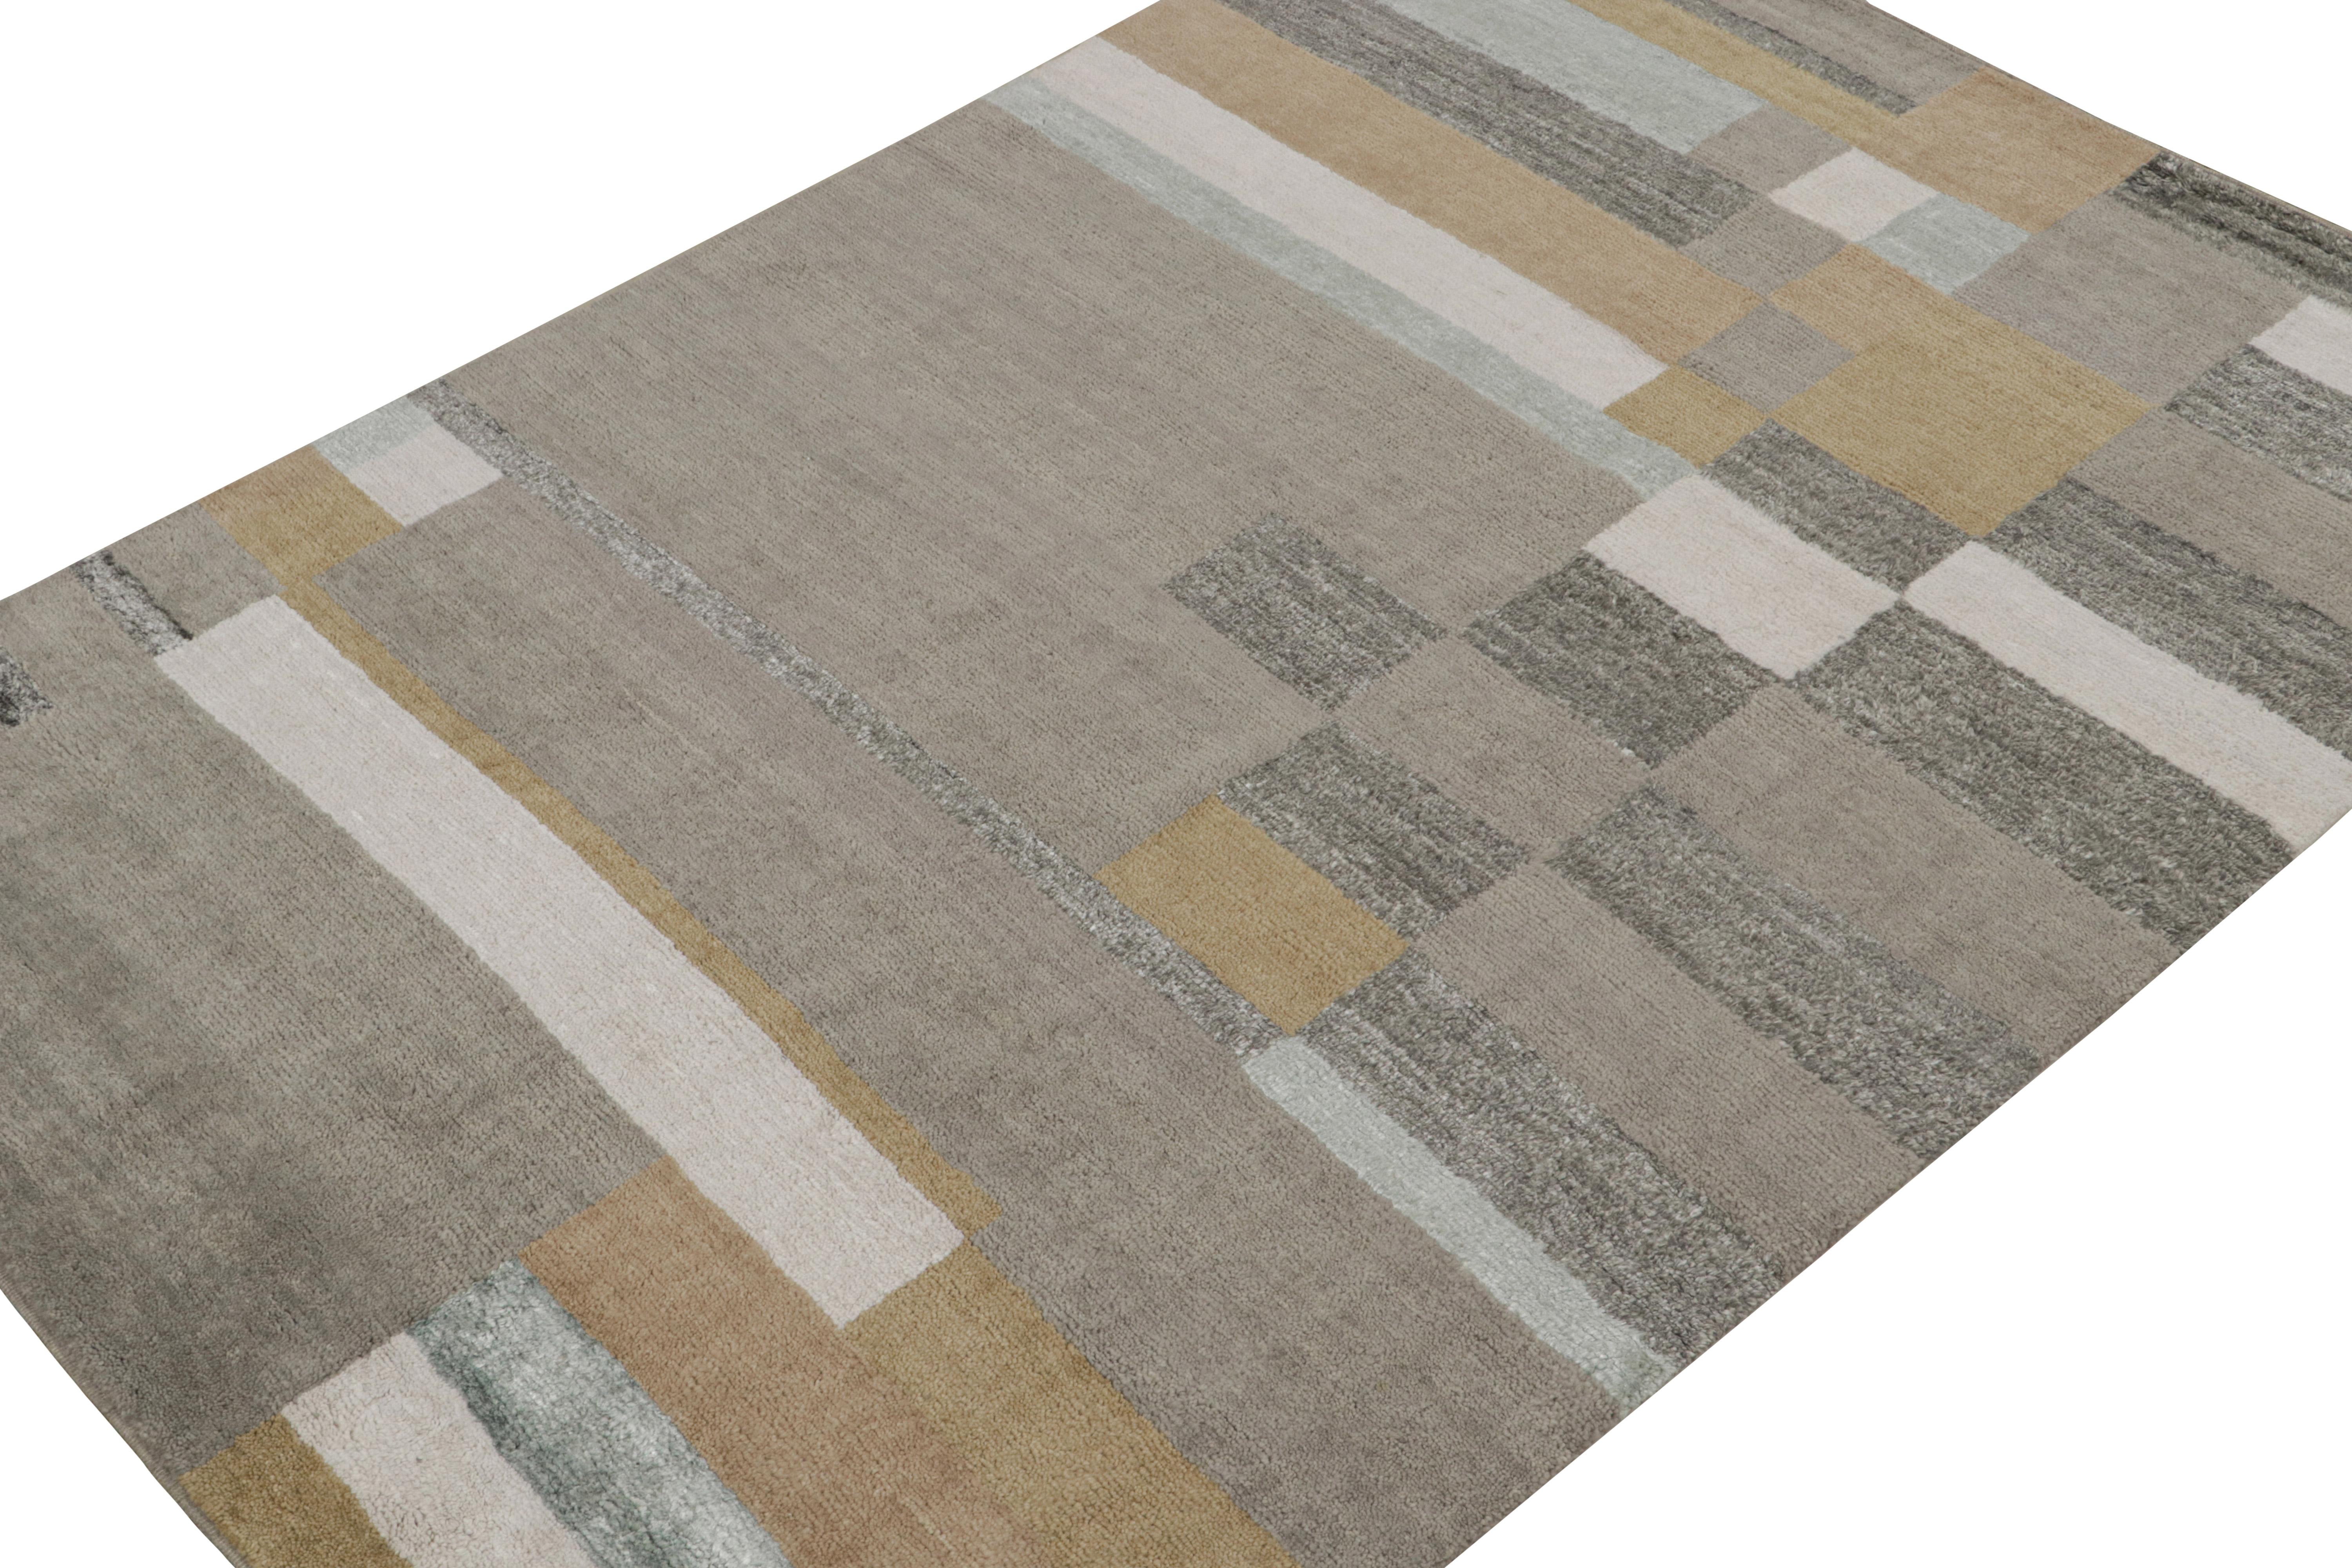 Hand-knotted in wool and silk, this 6x9 modern rug represents the Scandinavian rug collection by Rug & Kilim. This collection is a reimagining of Swedish Deco style Rollkhans and Rya pile rugs, and a contribution to the aesthetic in a high-end